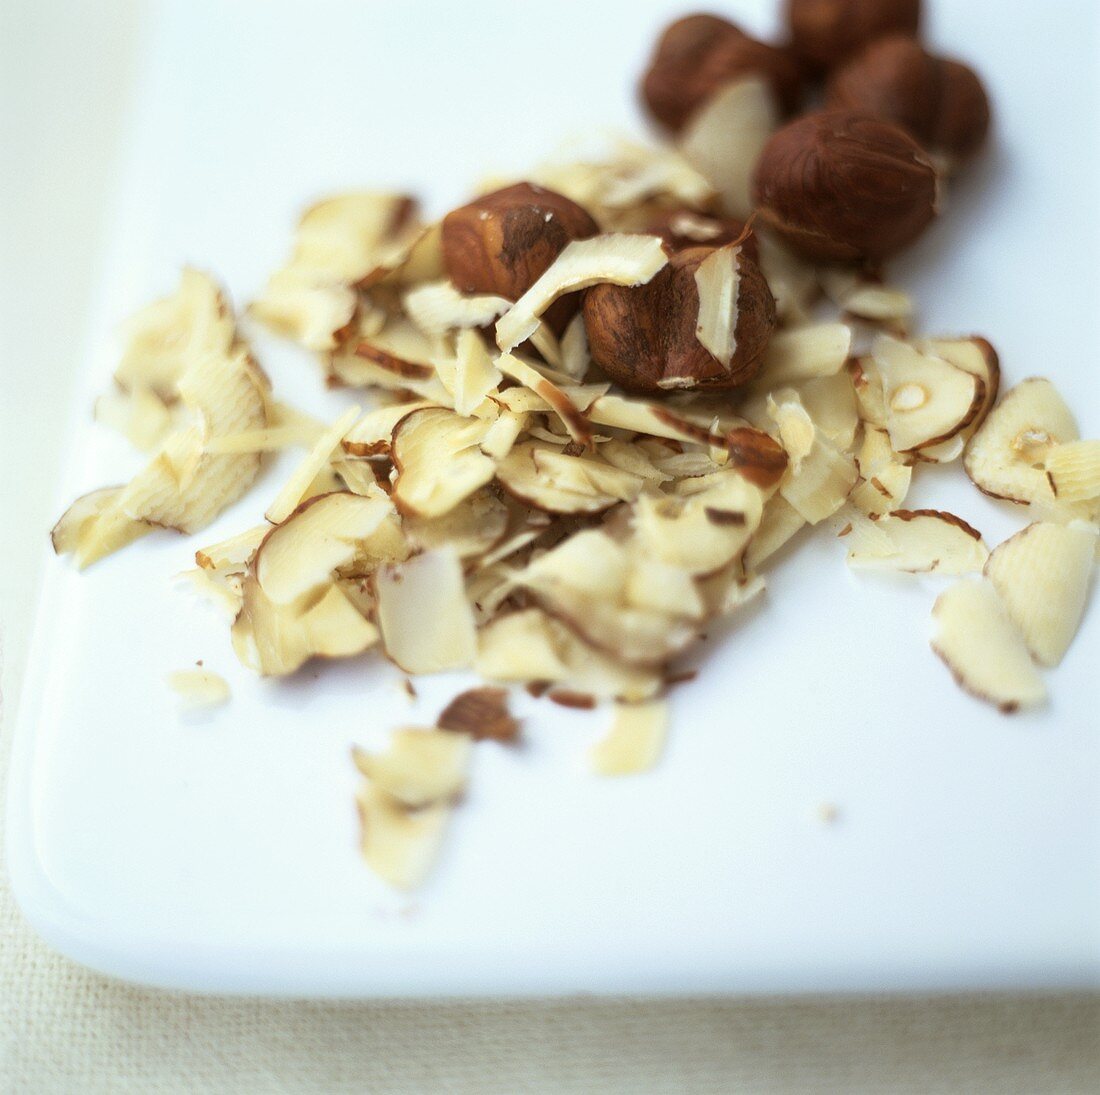 Shelled hazelnuts, whole and thinly sliced